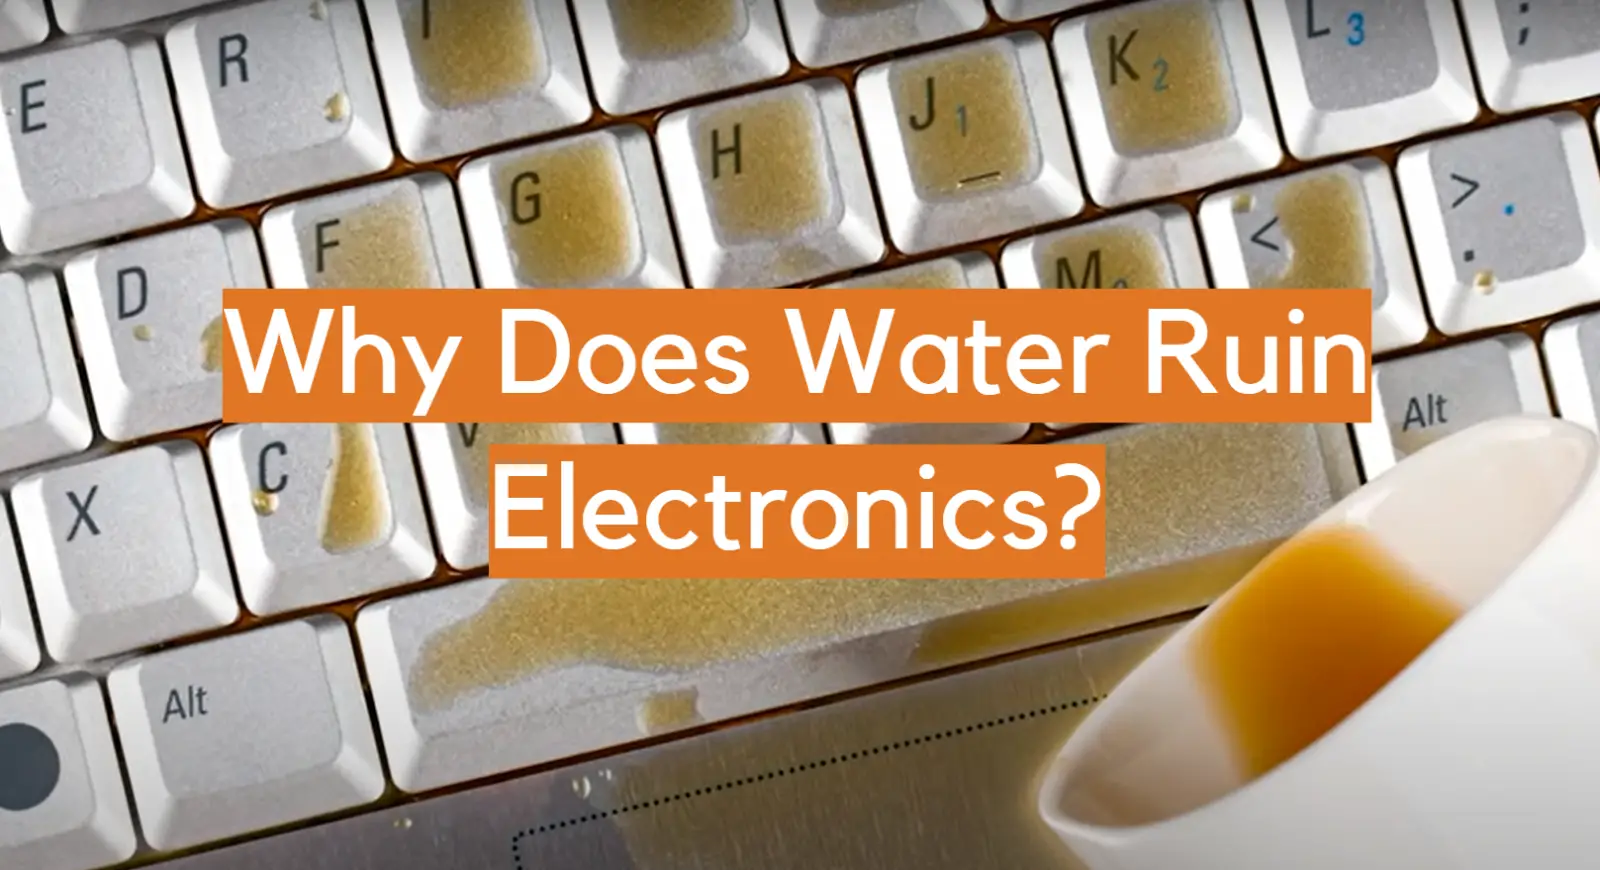 Why Does Water Ruin Electronics?